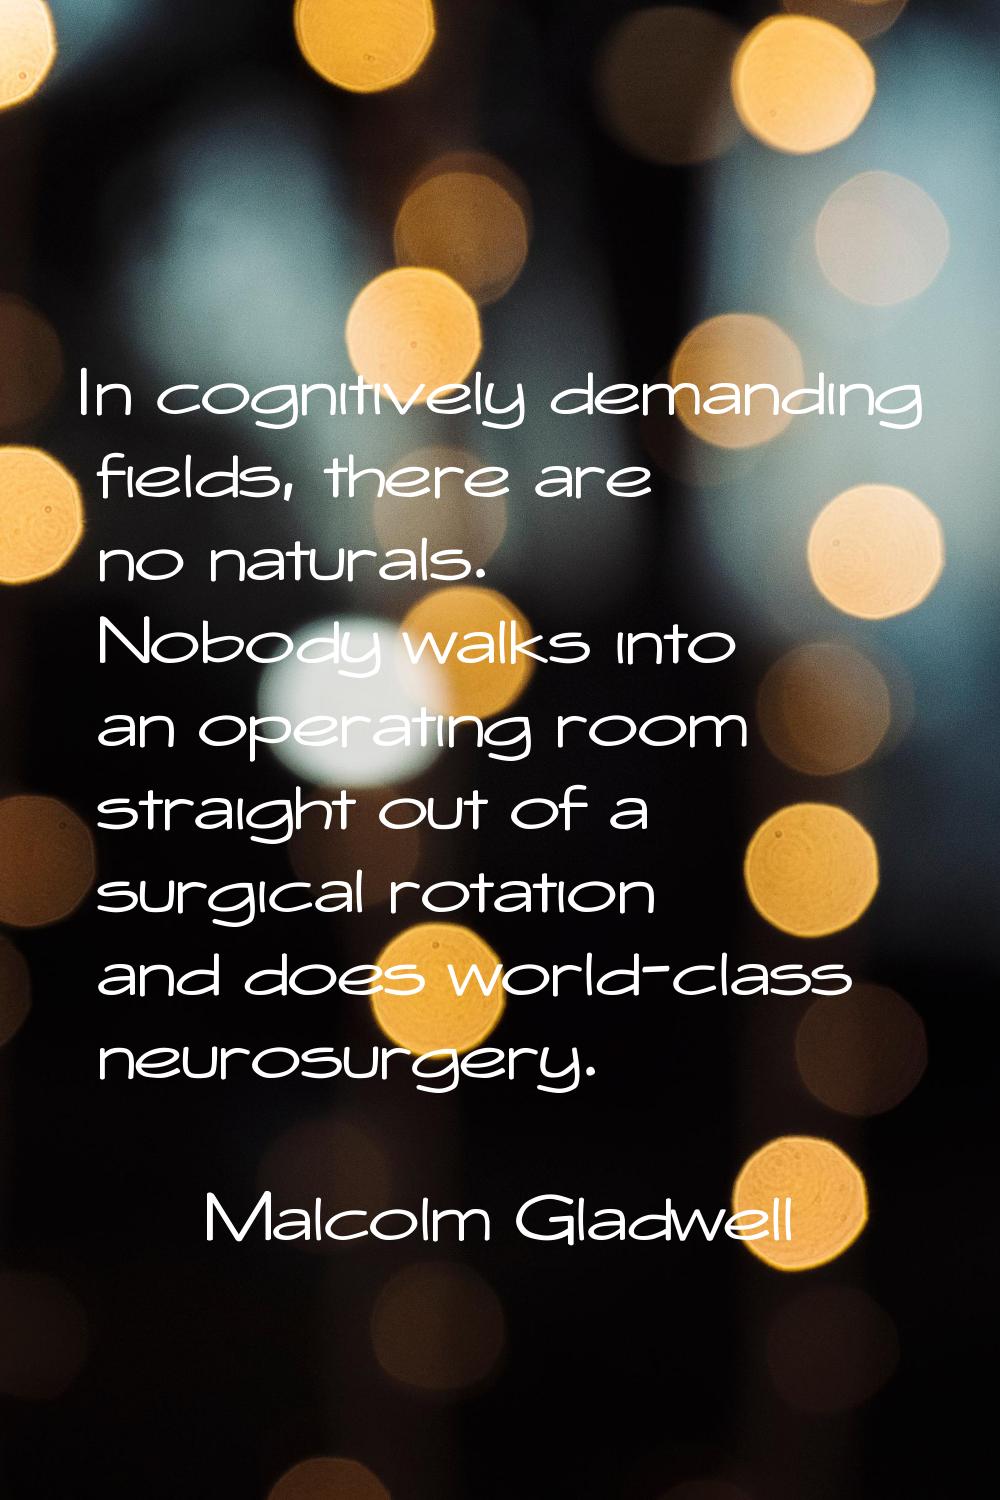 In cognitively demanding fields, there are no naturals. Nobody walks into an operating room straigh